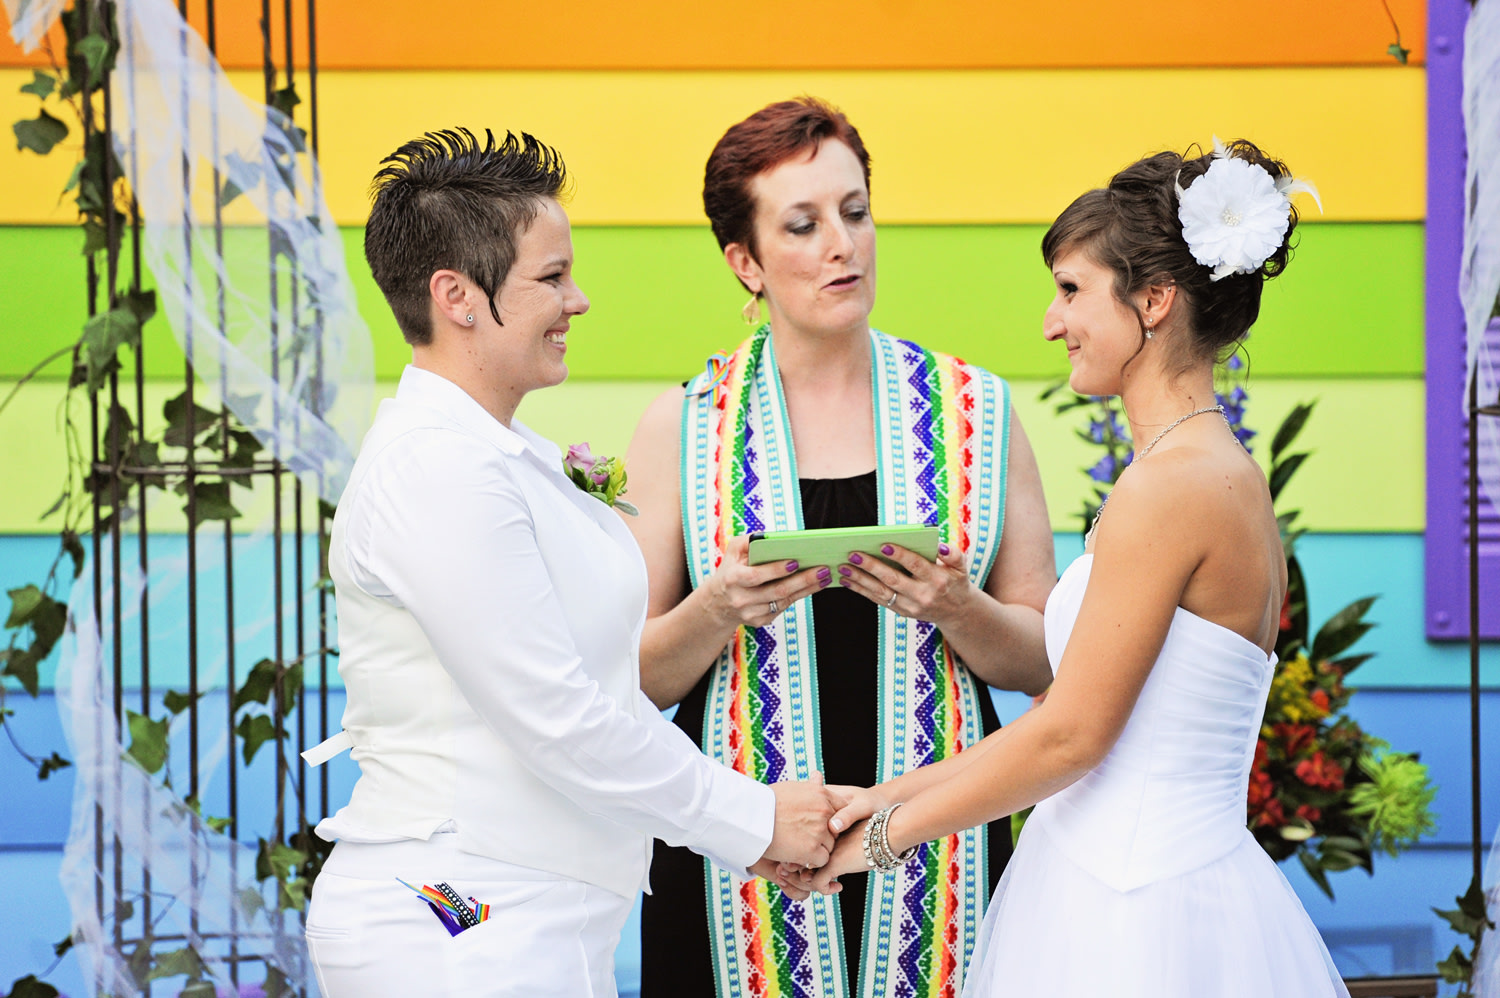 Take that, Westboro Baptist Church! Lesbian couple marries across the street